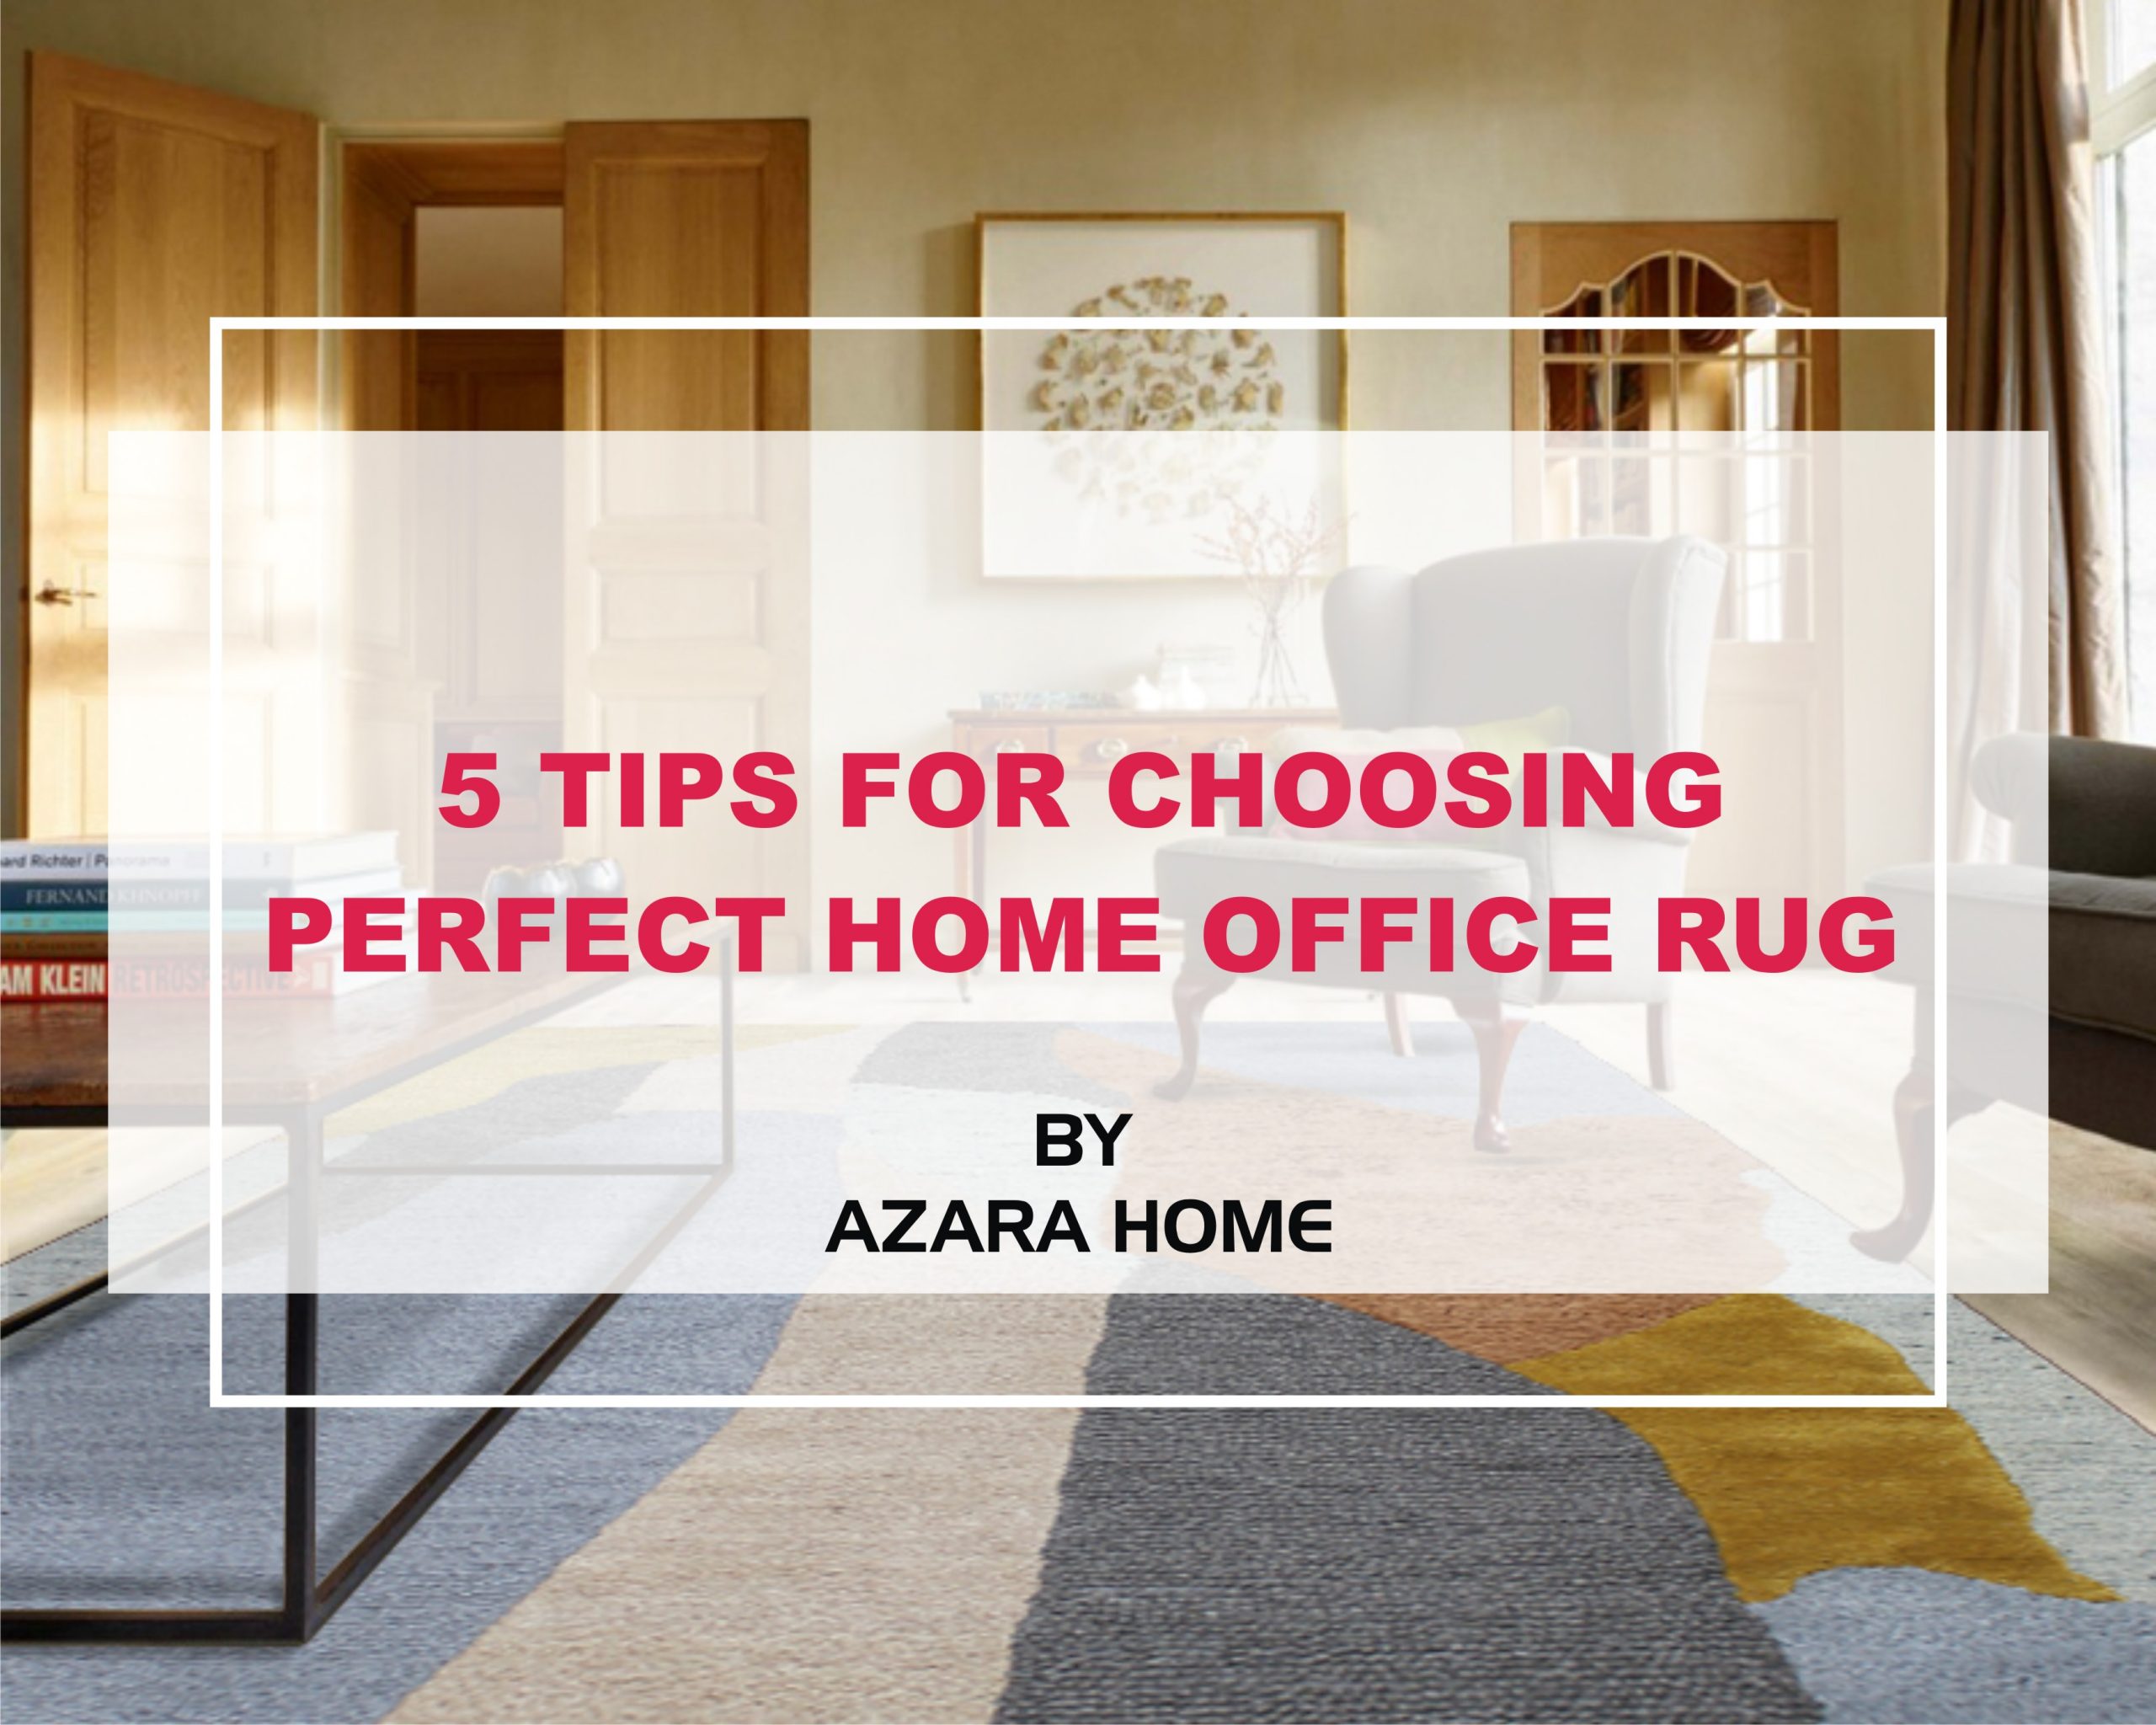 Rapidshare Nudist - 5 Tips For Choosing Perfect Home Office Rug - Azara Home